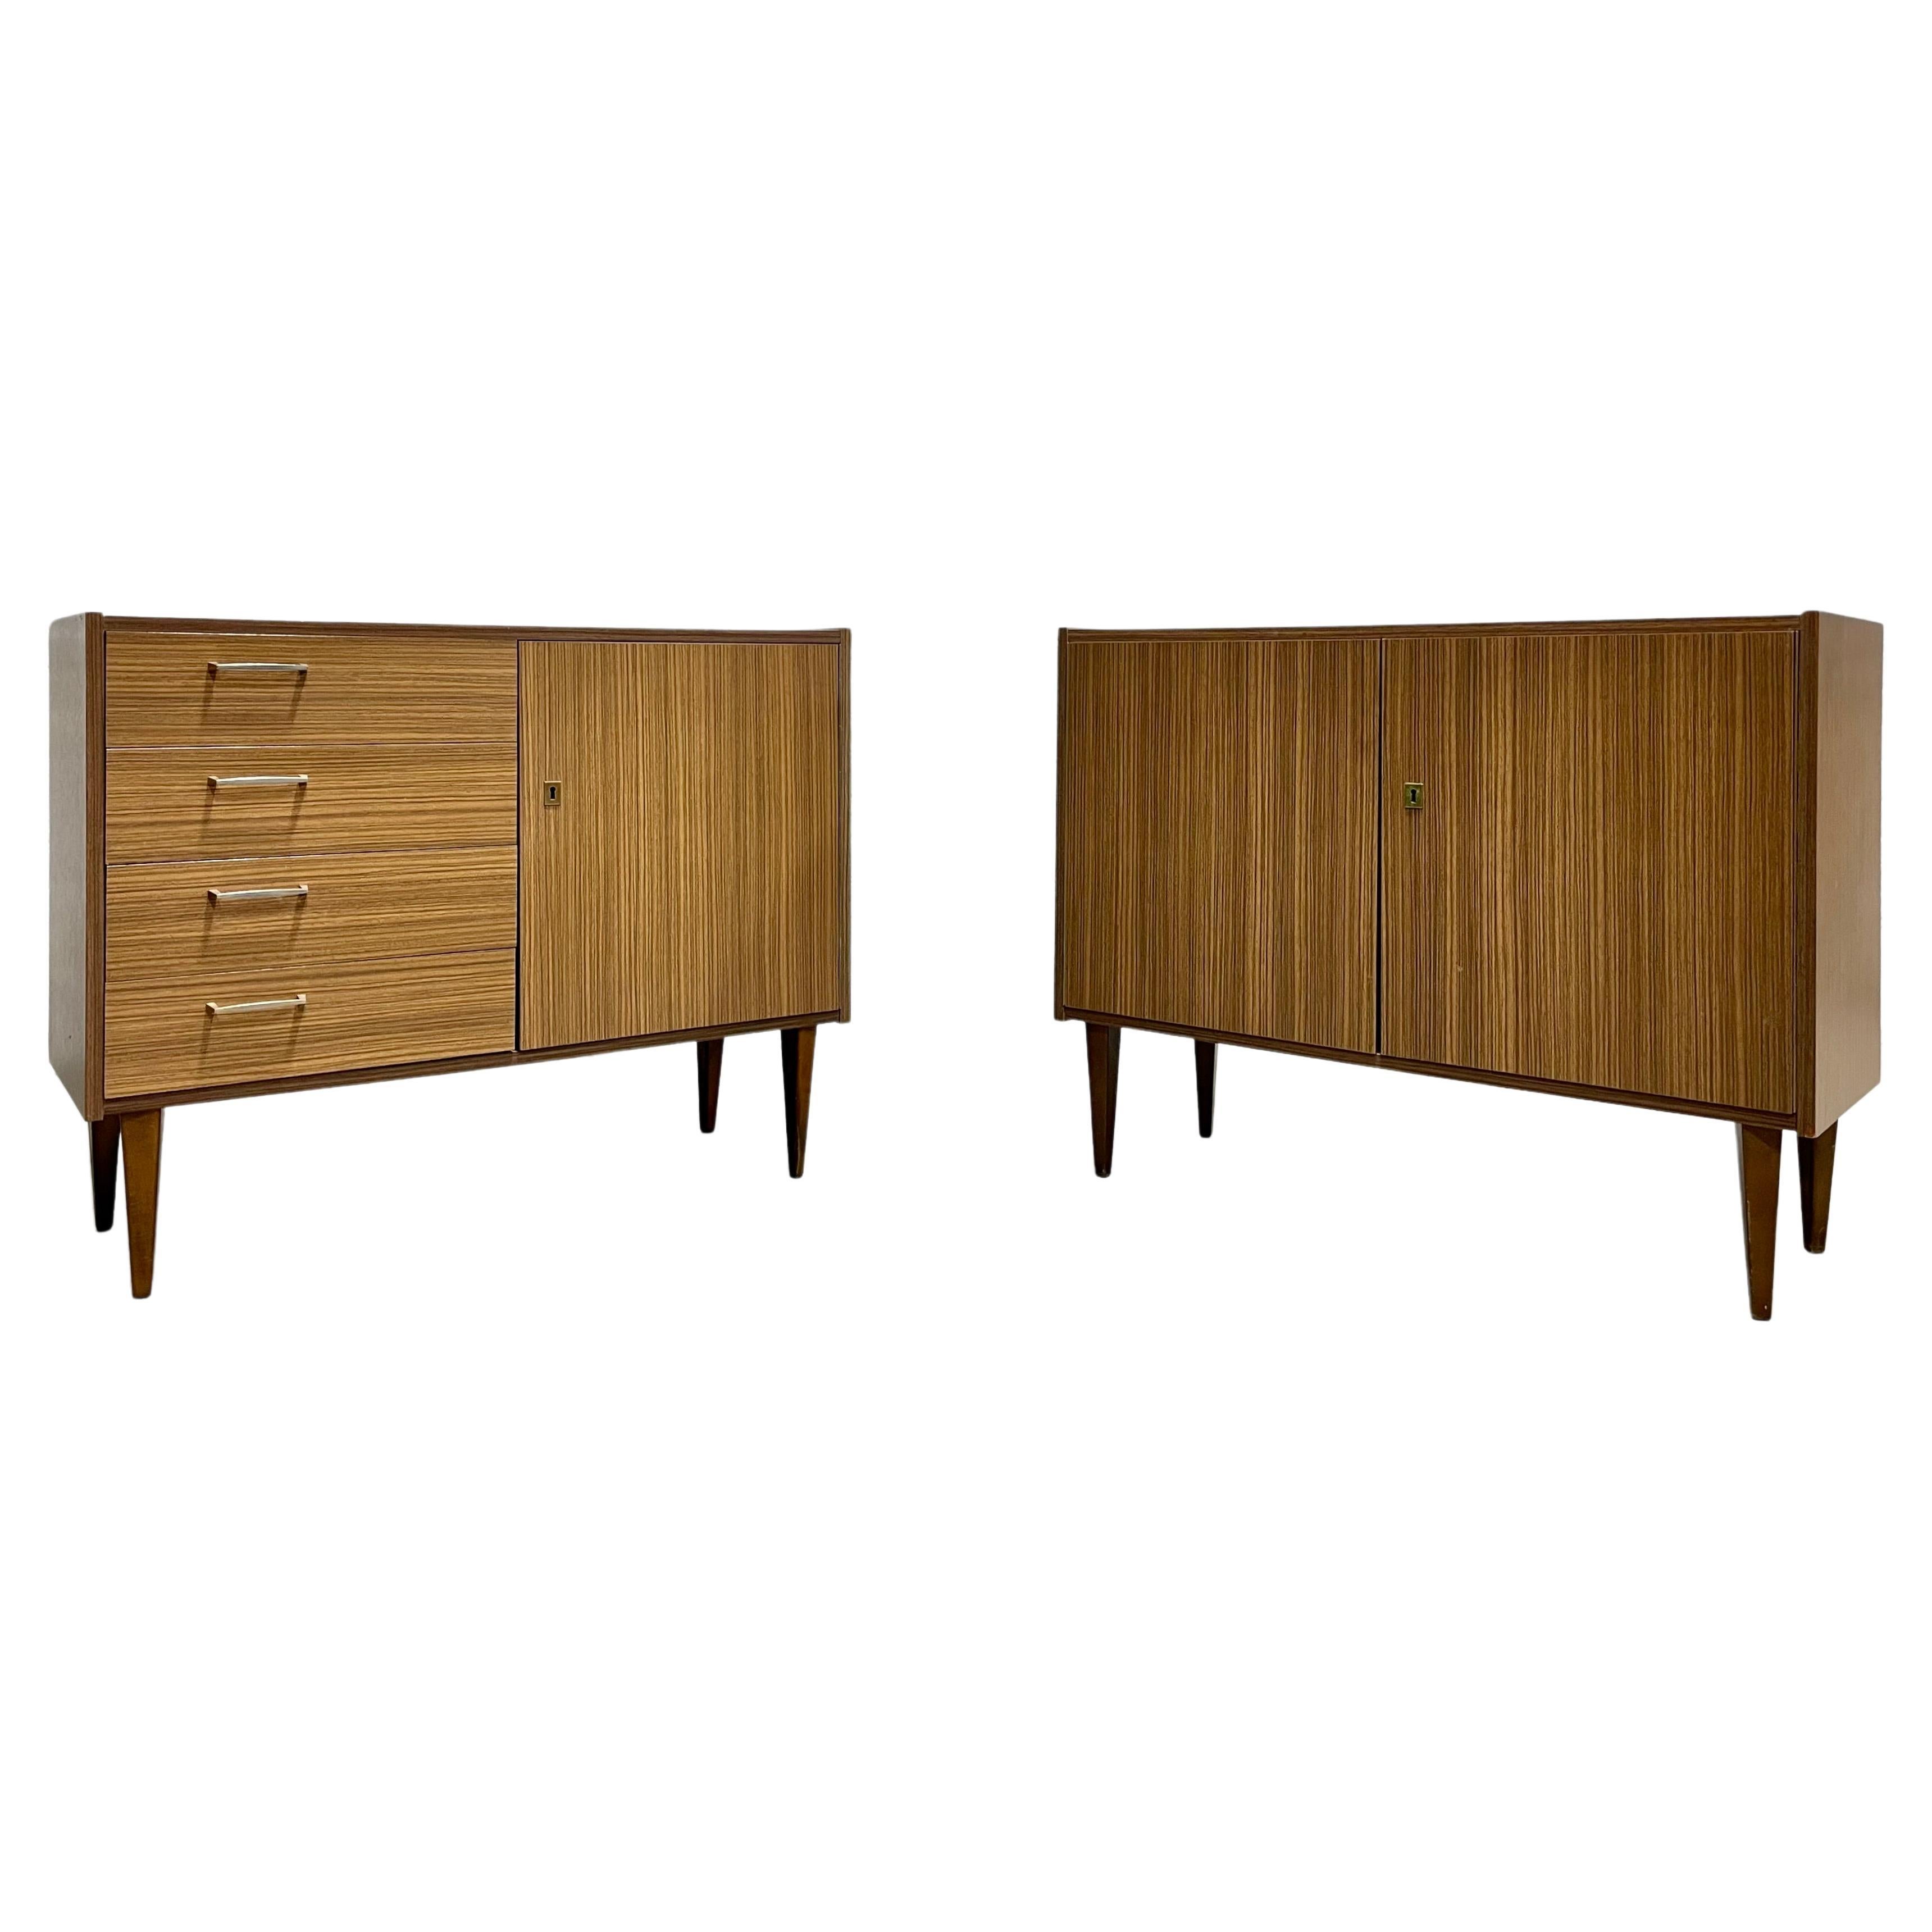 PAIR Mid Century MODERN Laminate CREDENZAS/ Cabinets, Made in Germany, c. 1960's